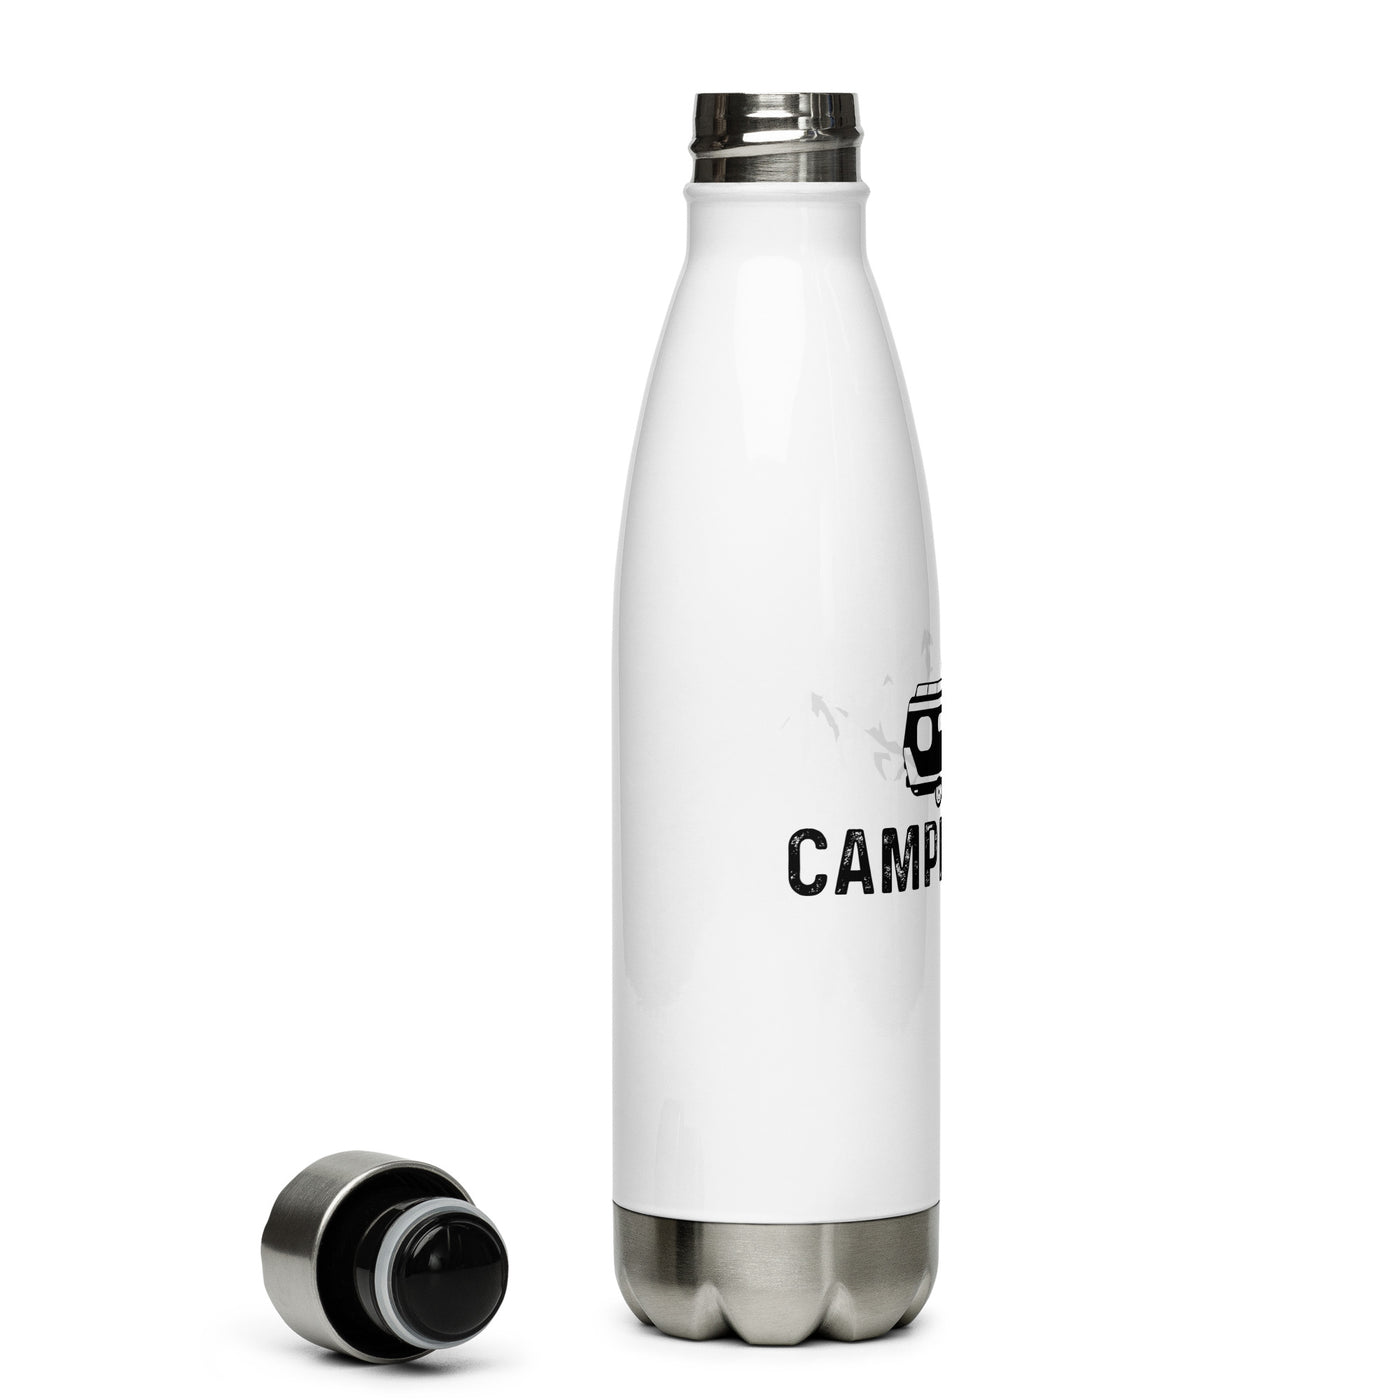 Camping Vater - Edelstahl Trinkflasche camping